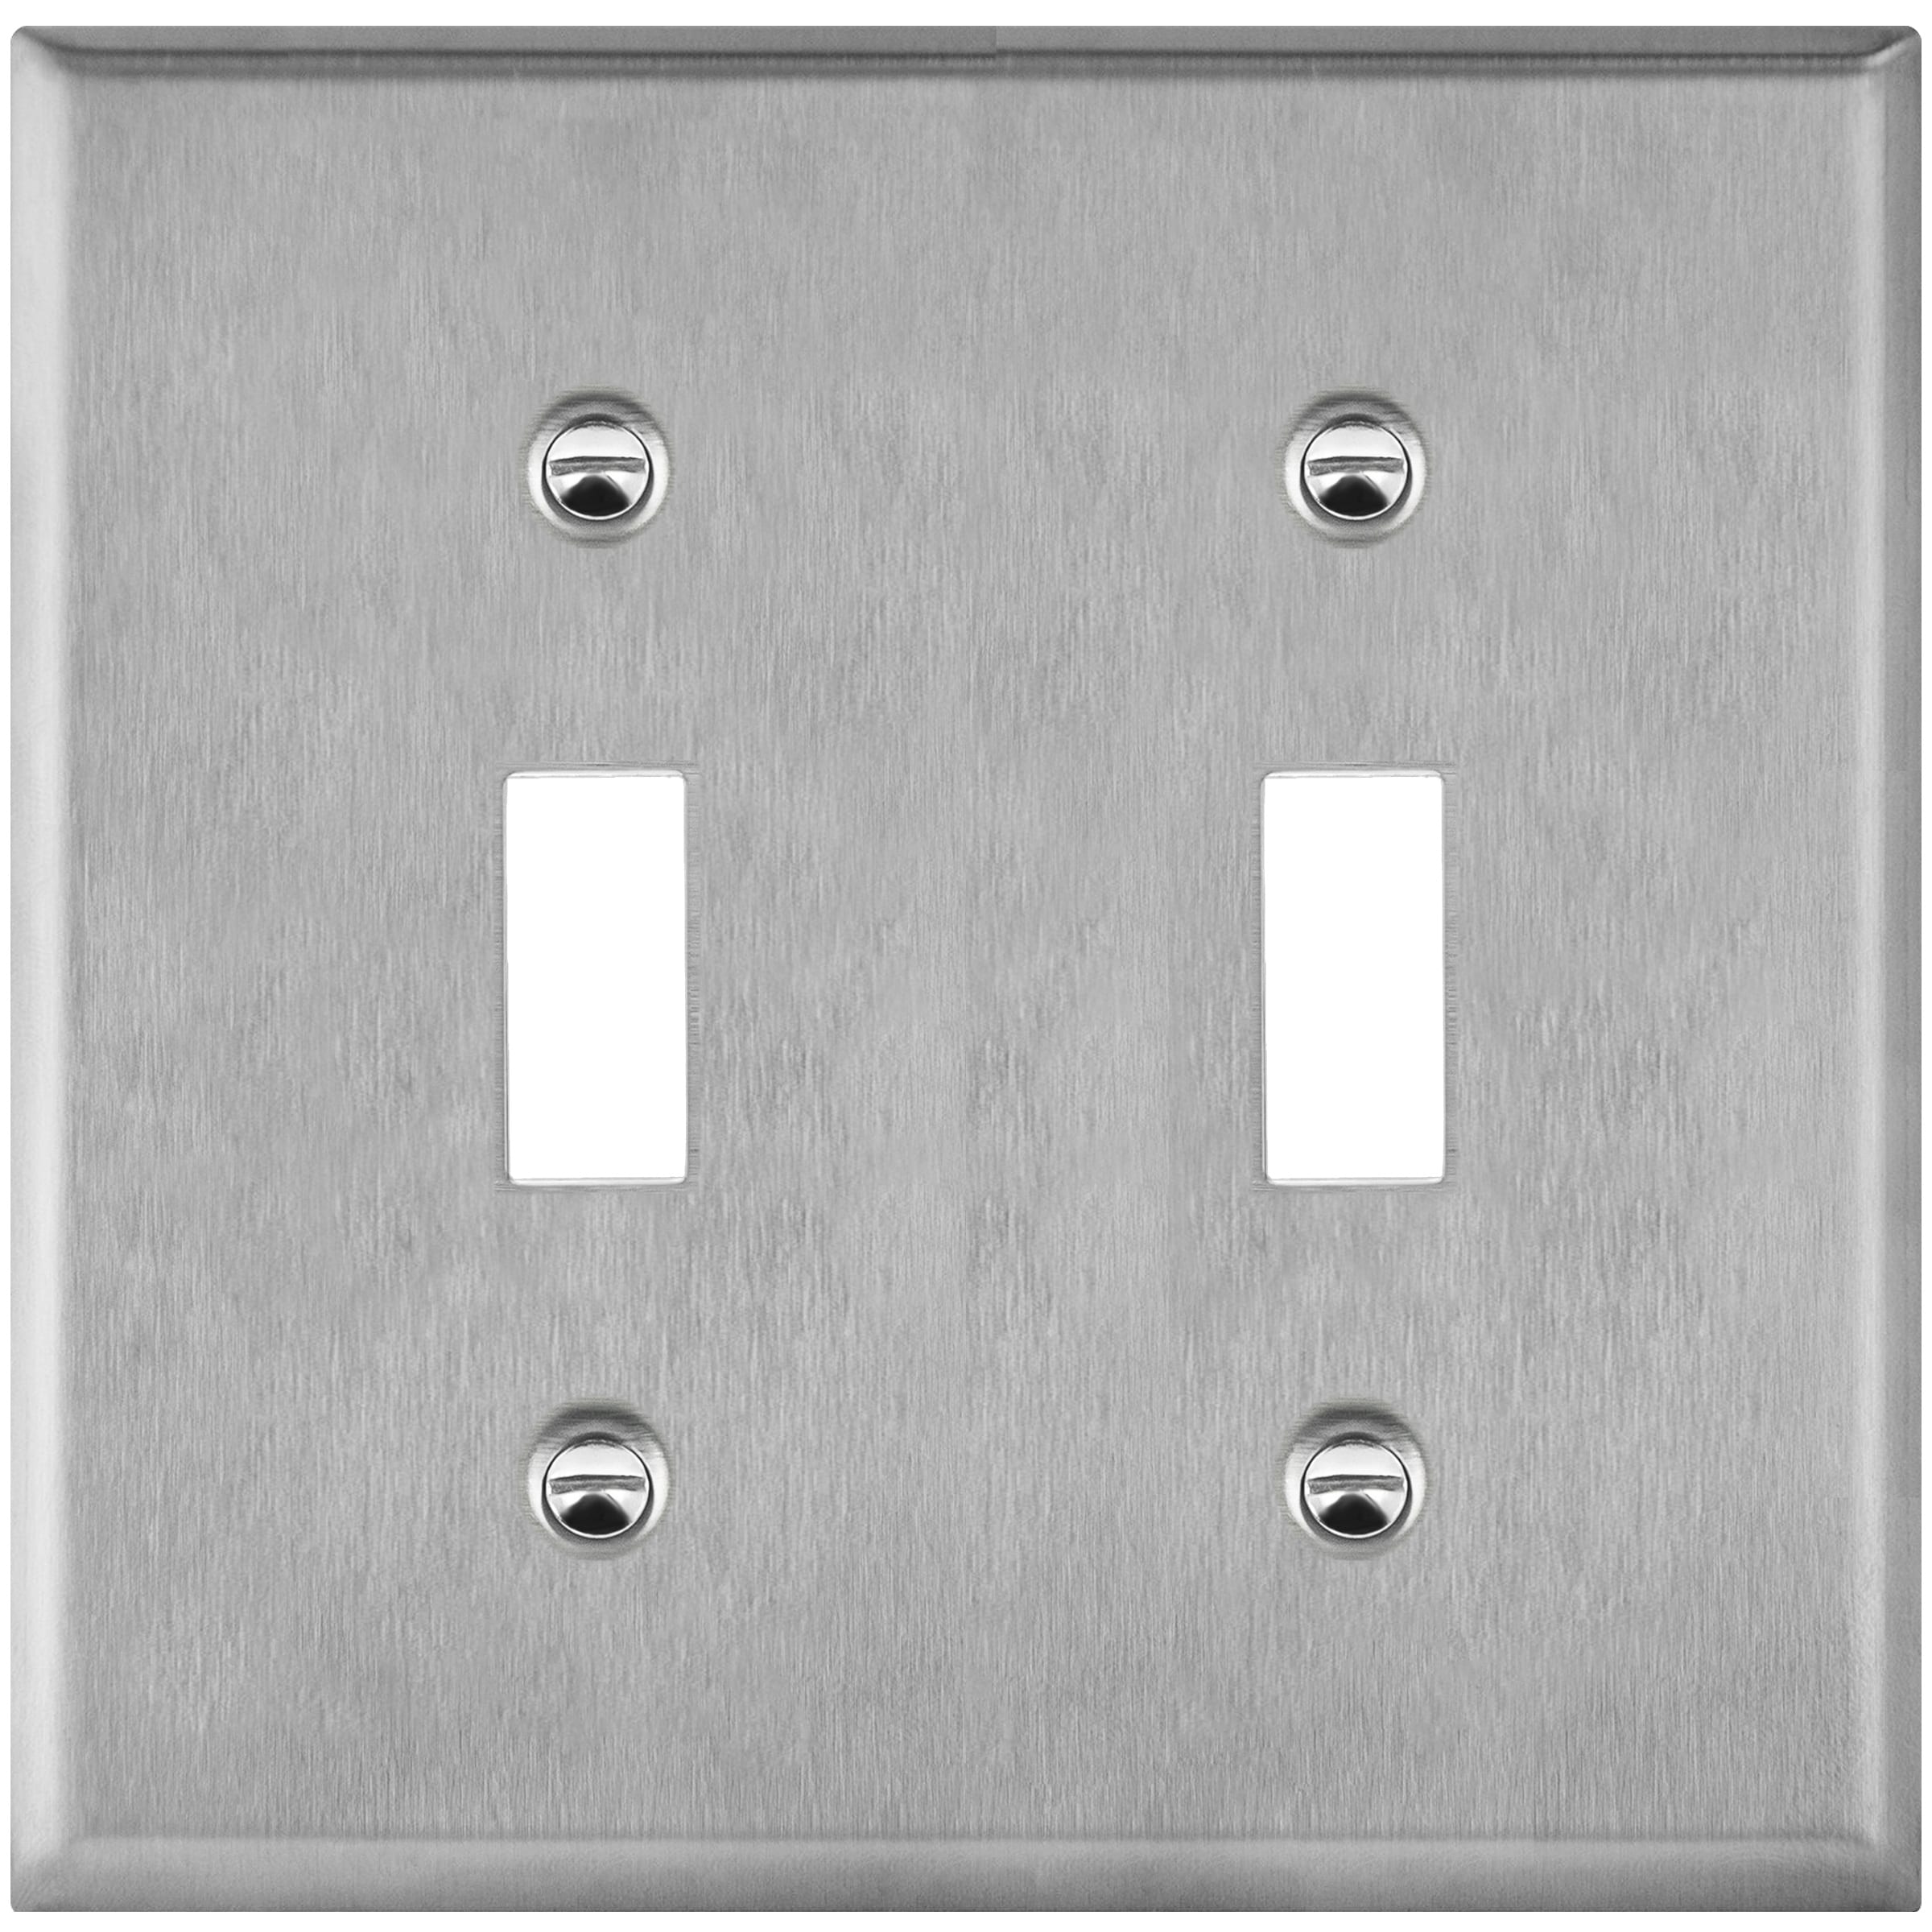 2-Gang Stainless Steel Toggle Switch Wall Plate